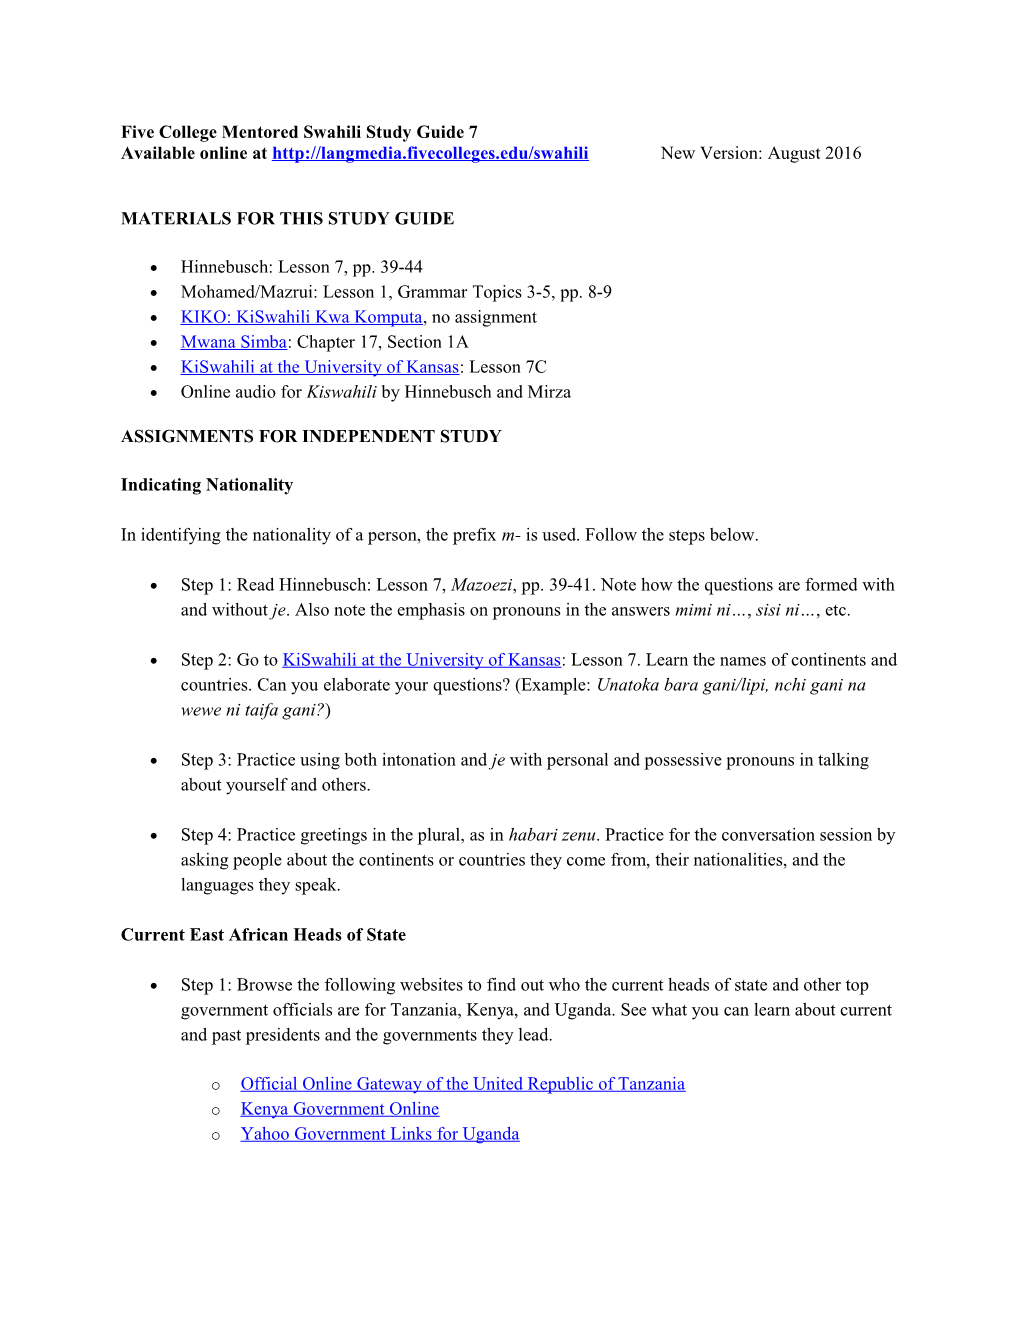 Five College Mentored Swahili Study Guide 1